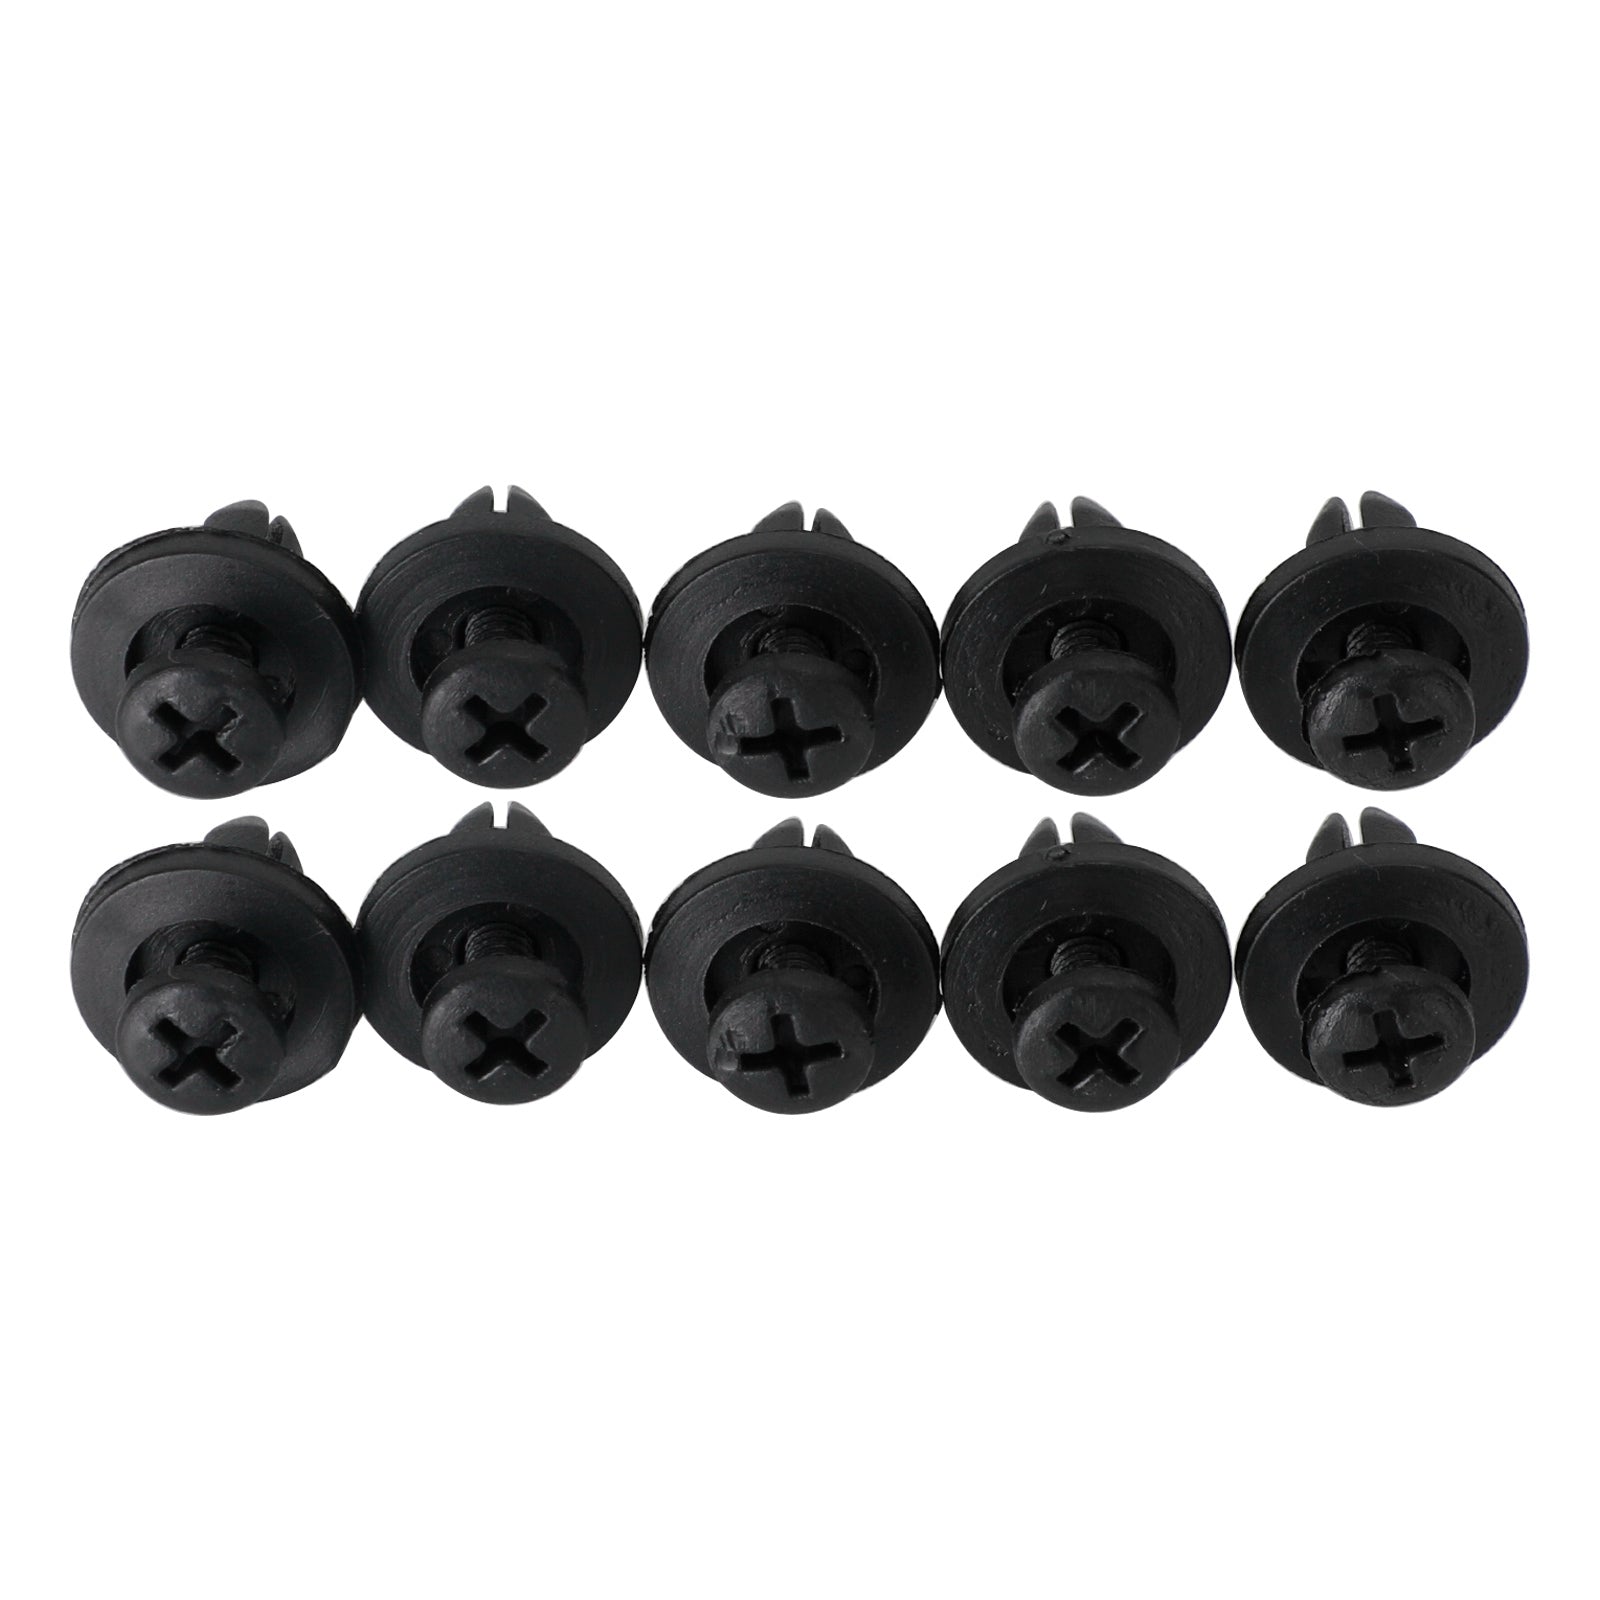 10 Pack 6mm Fairing Panel Trim Clips Screw In Rivets Clip Motorcycle Universal Generic